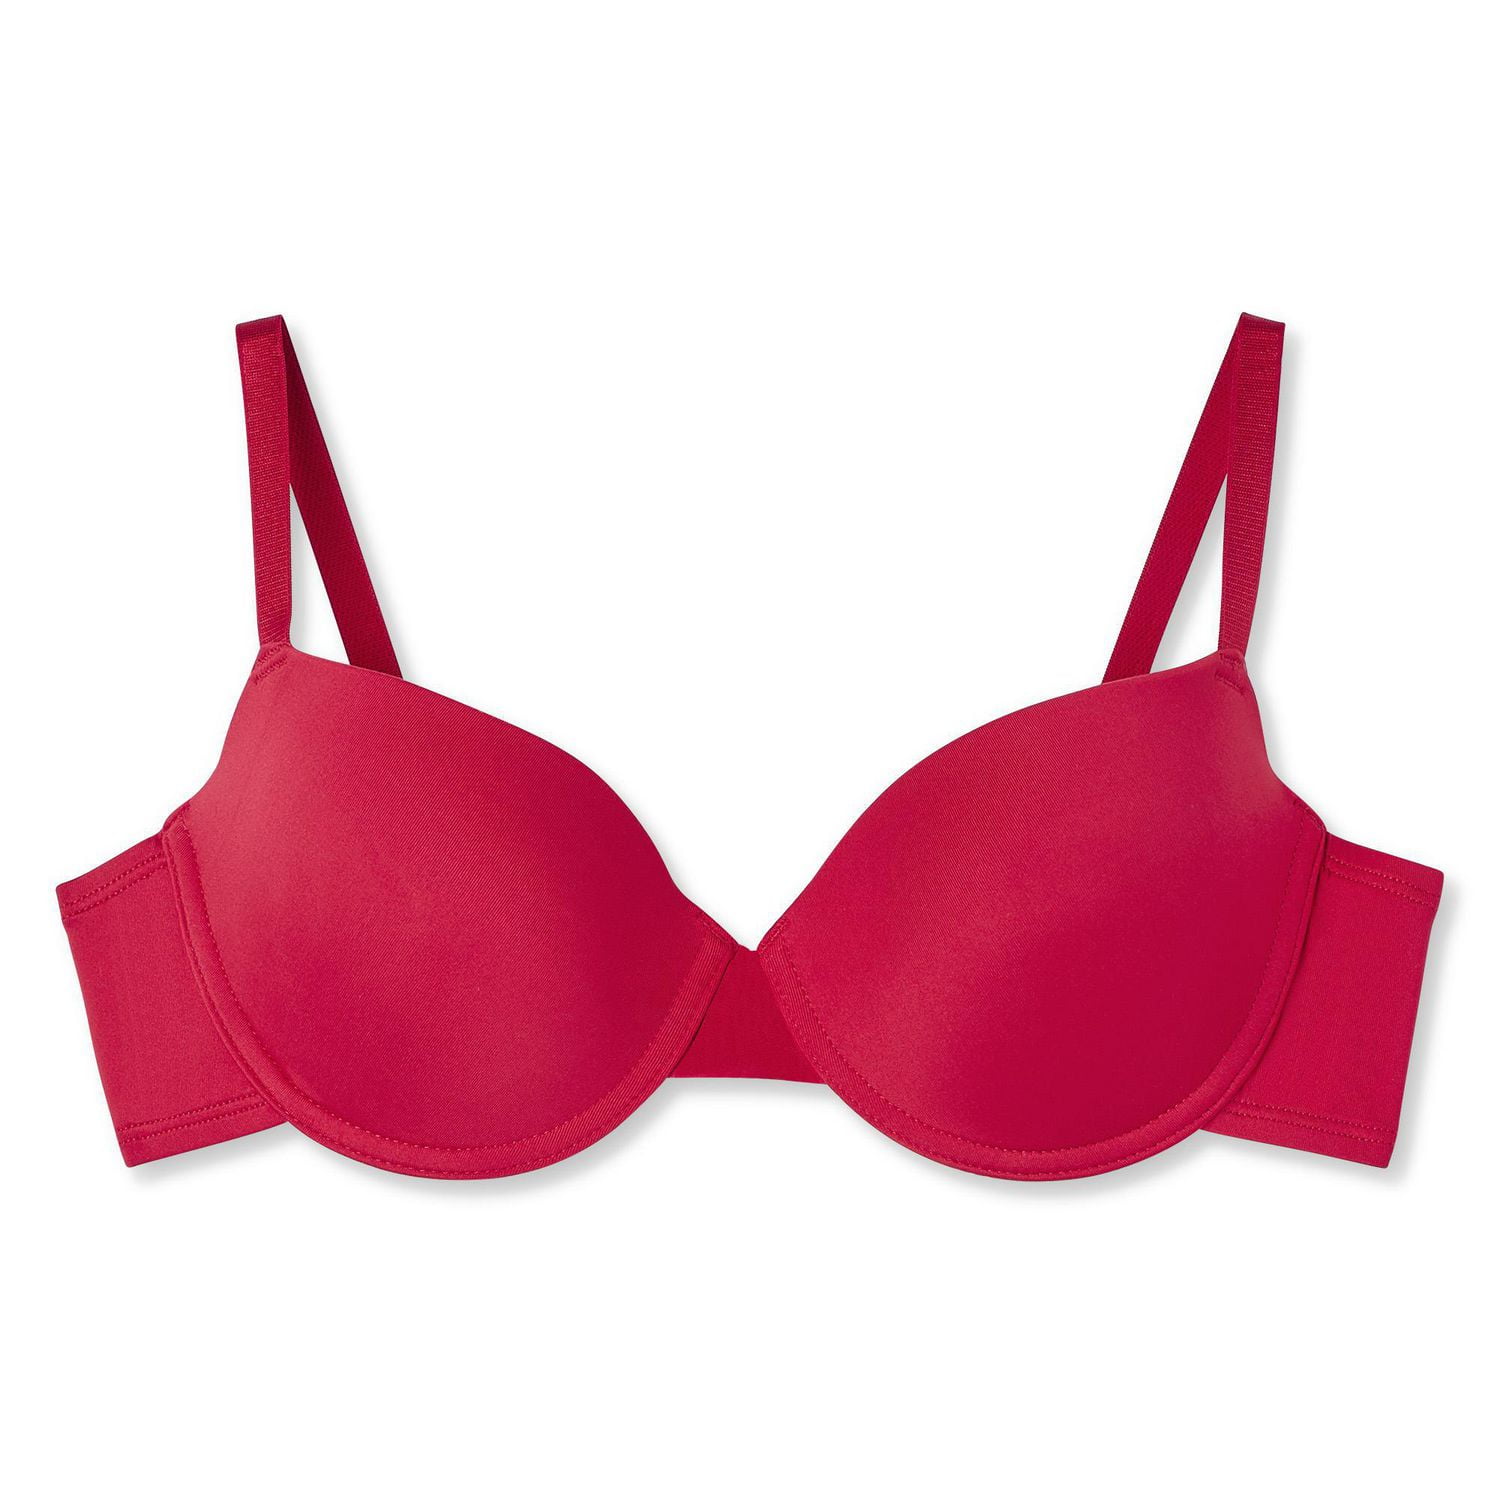 What Is My Bra Size? New Upbra App More Accurate than a Tape Measure